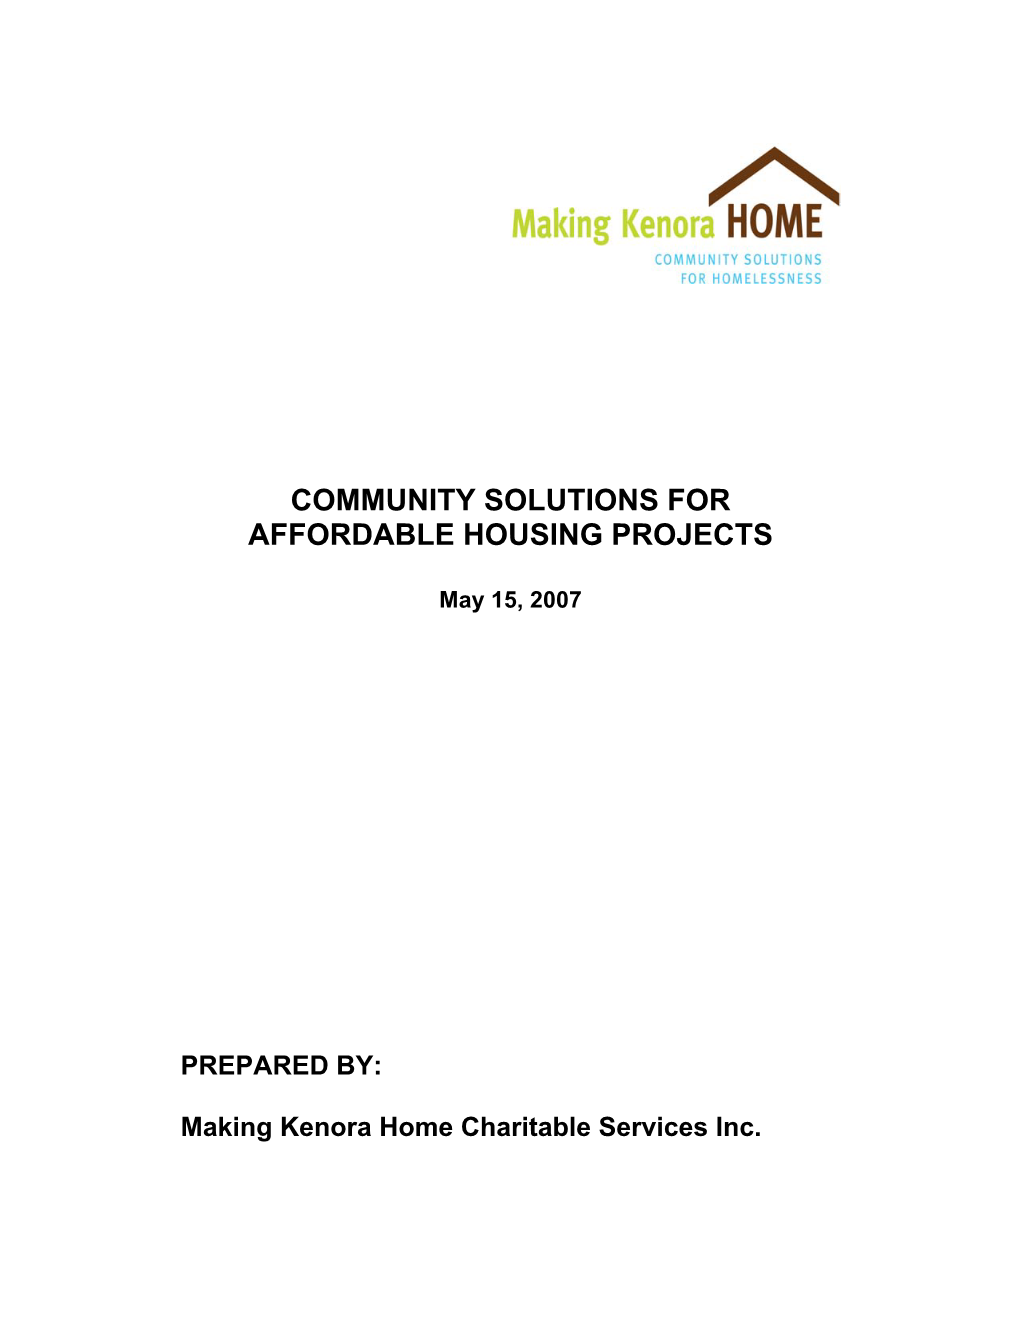 Community Solutions for Affordable Housing Projects